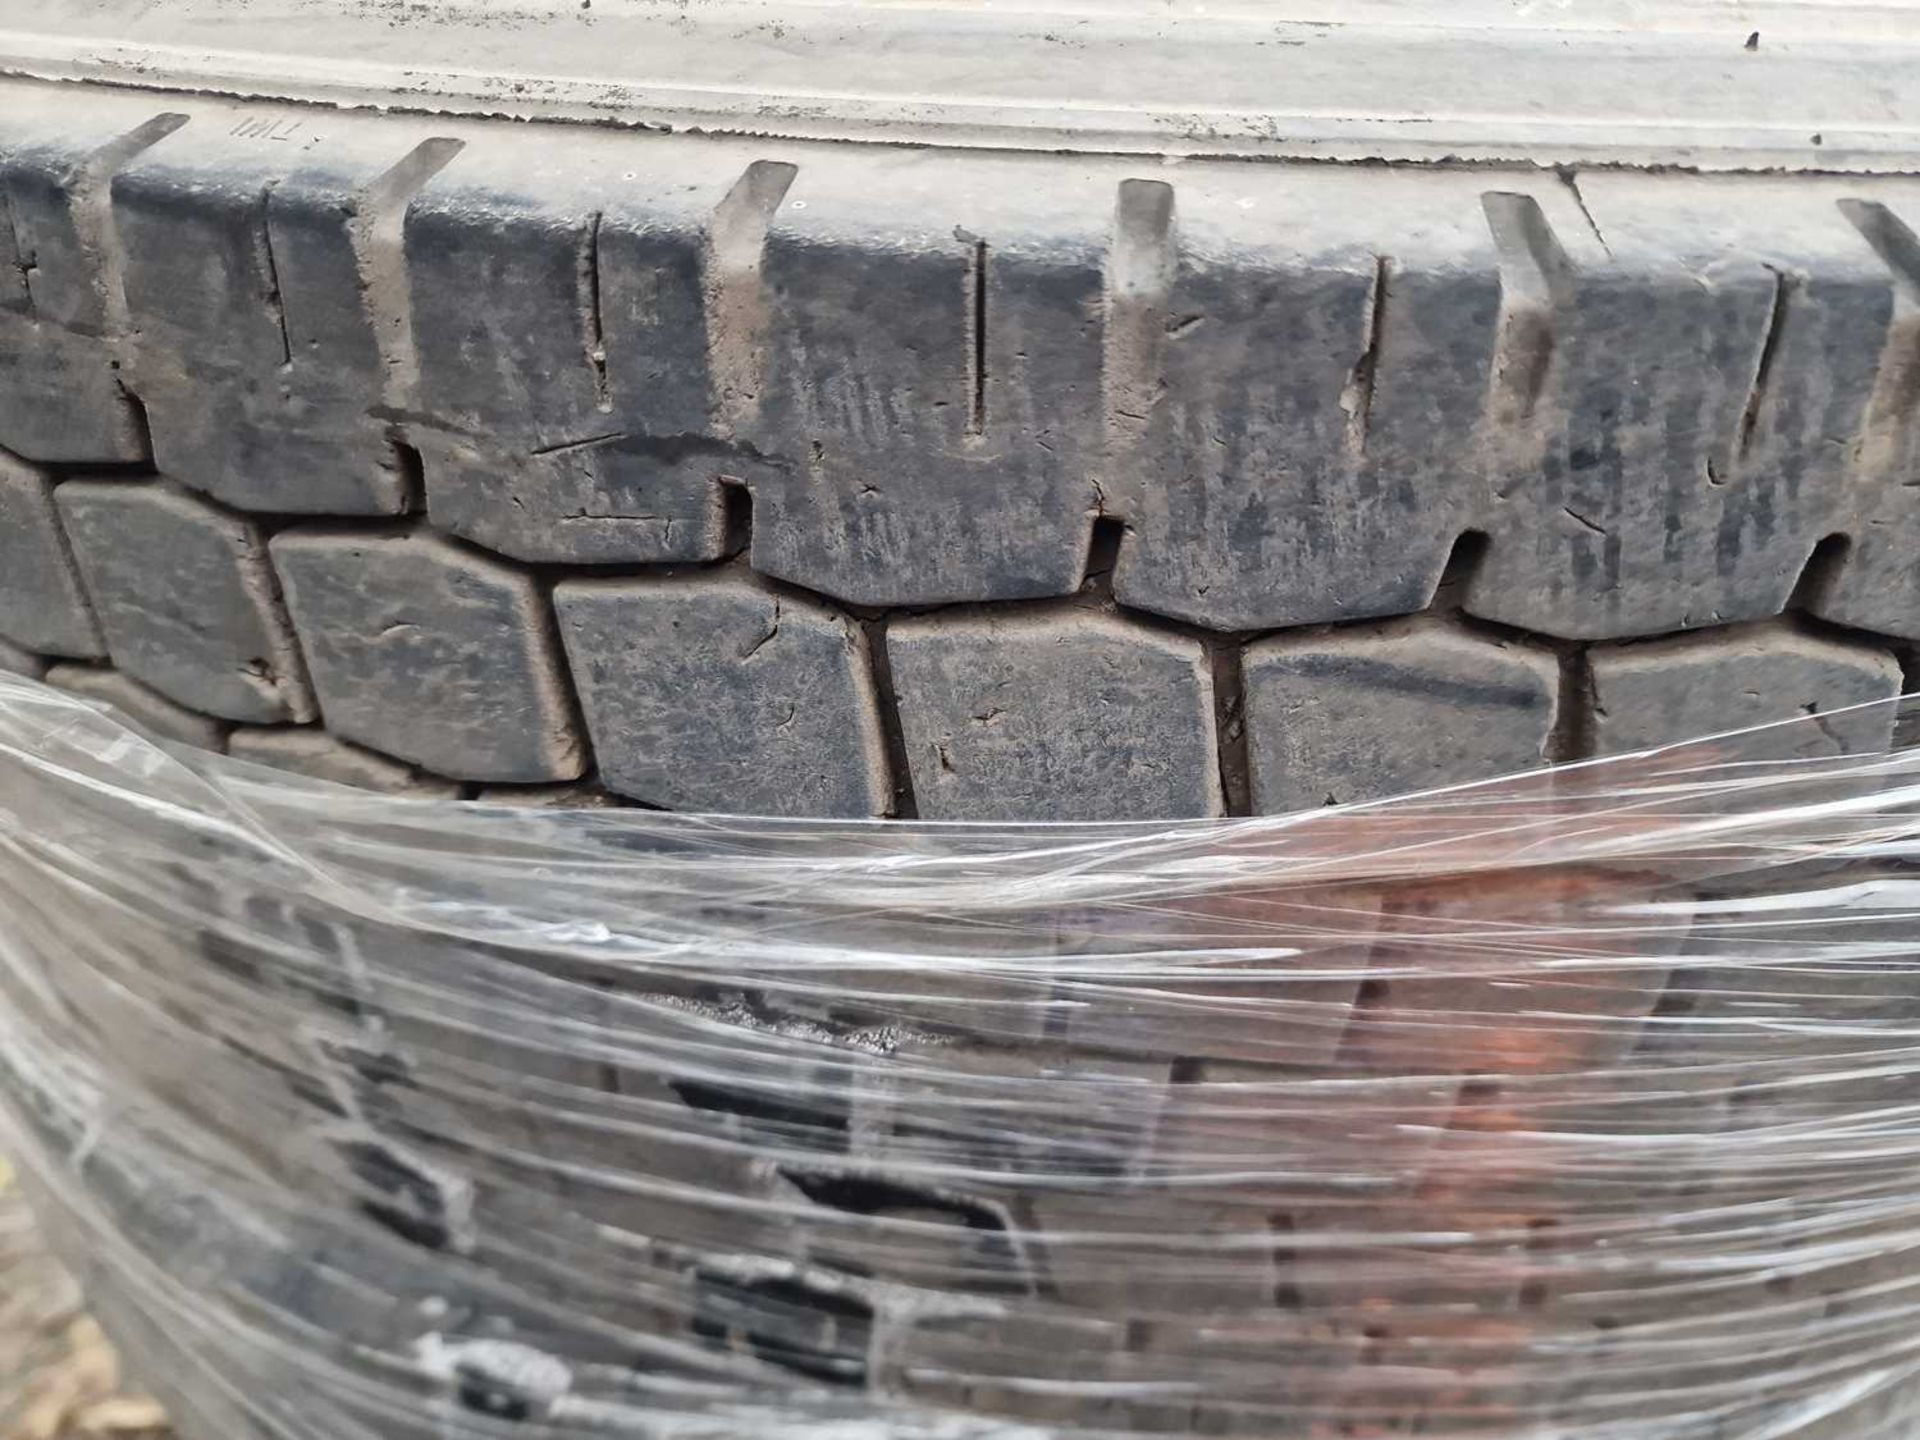 Golden Crown 295/80R22.5 Tyre (4 of) - Image 6 of 6